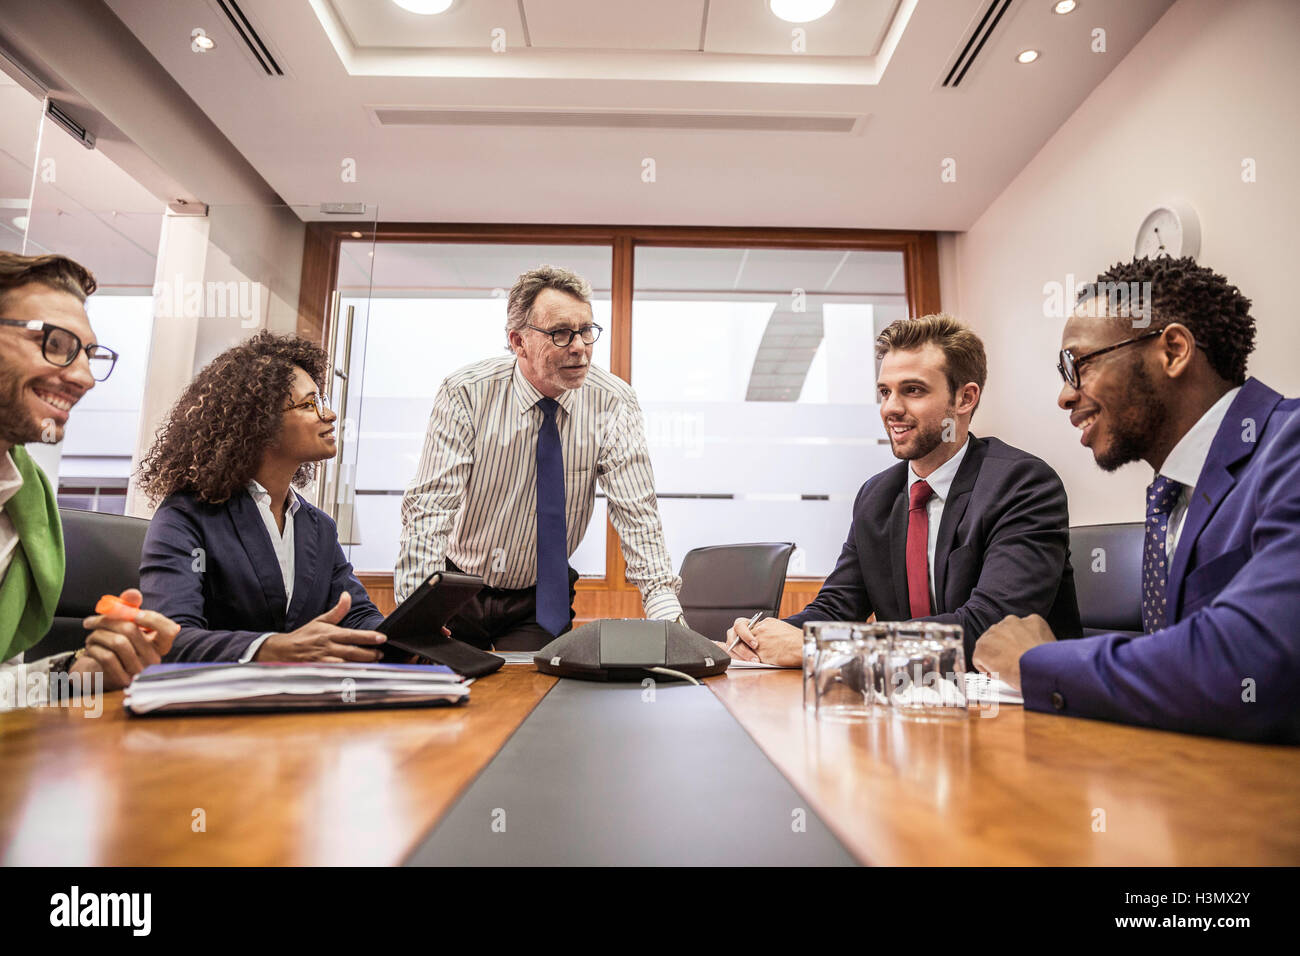 Business team having discussion at boardroom table meeting Stock Photo